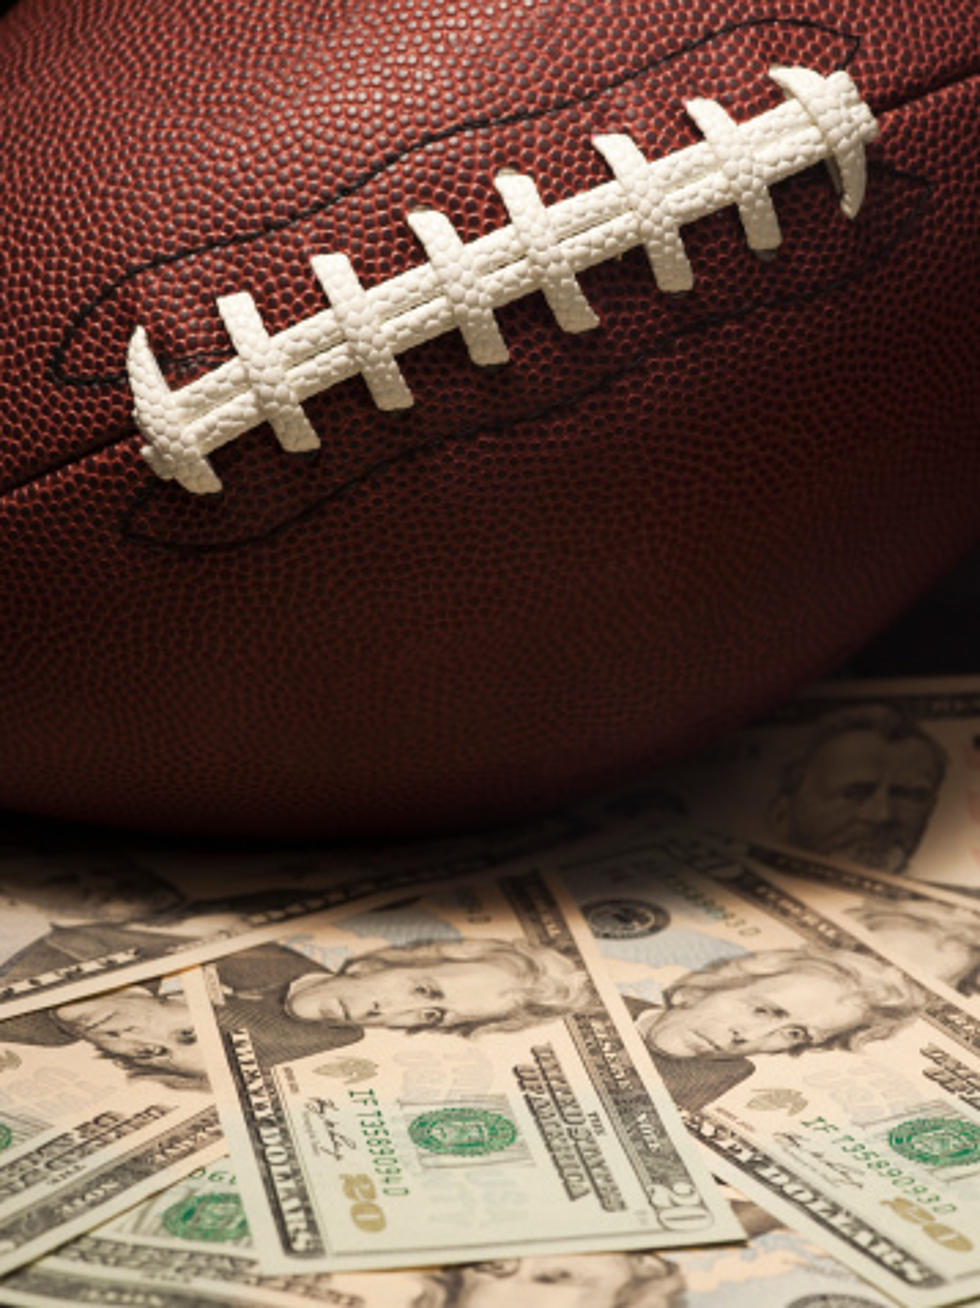 Illinoisans Can Bet On Super Bowl, Not Novelty Bets